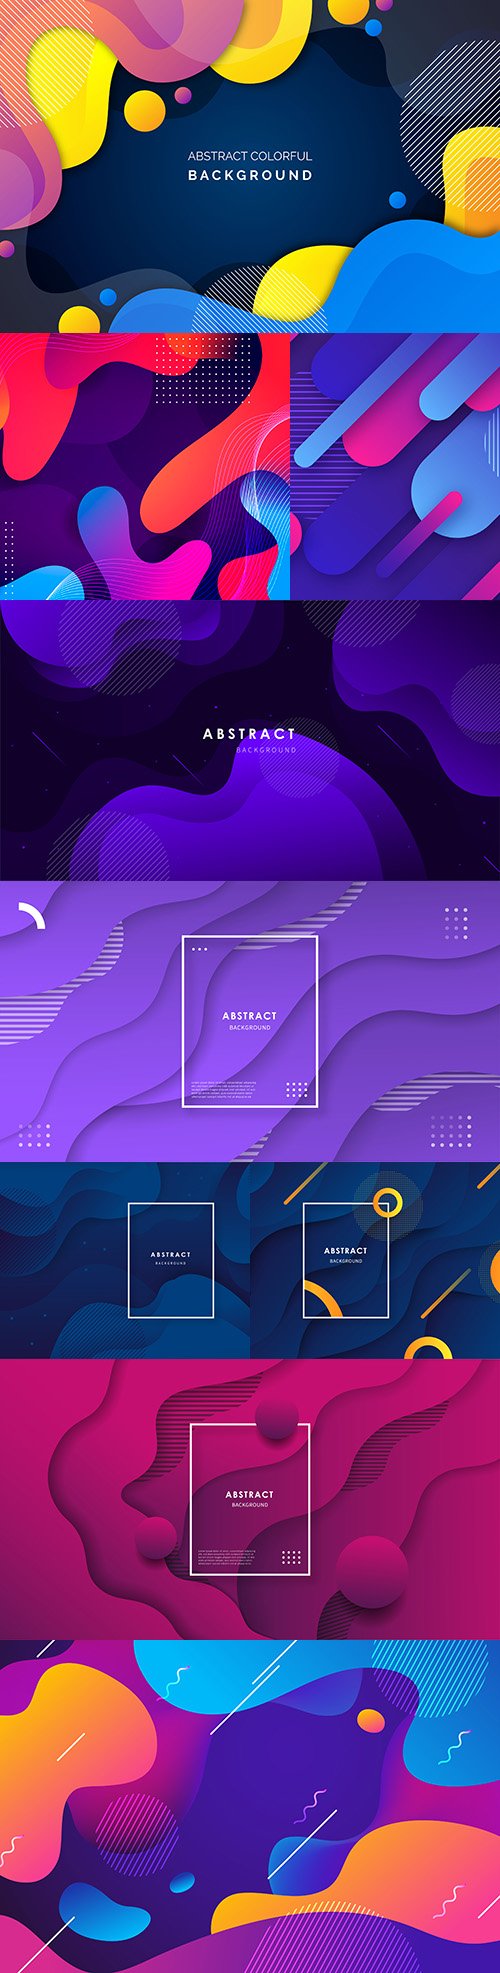 Abstract gradient wave background with colorful shapes